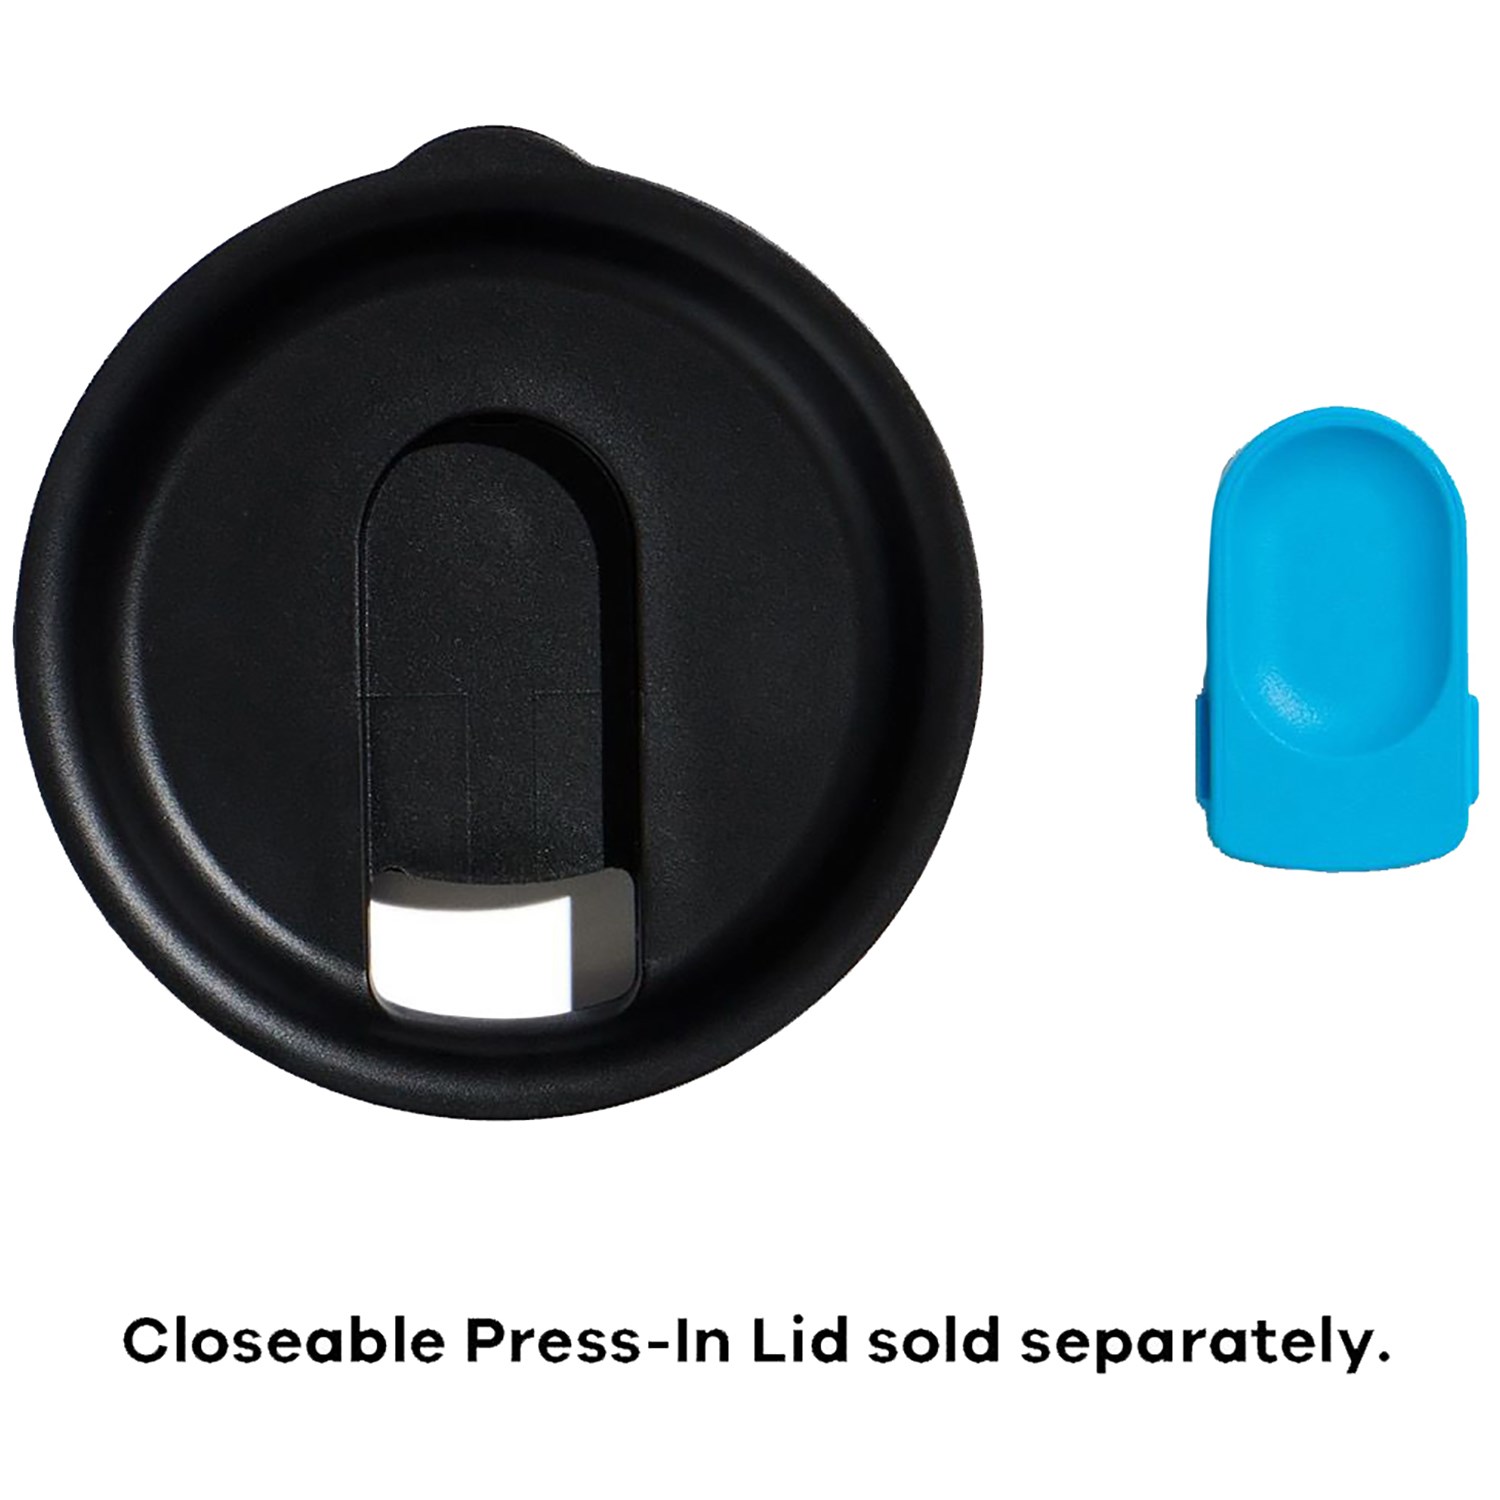 Closeable Press-in Lid